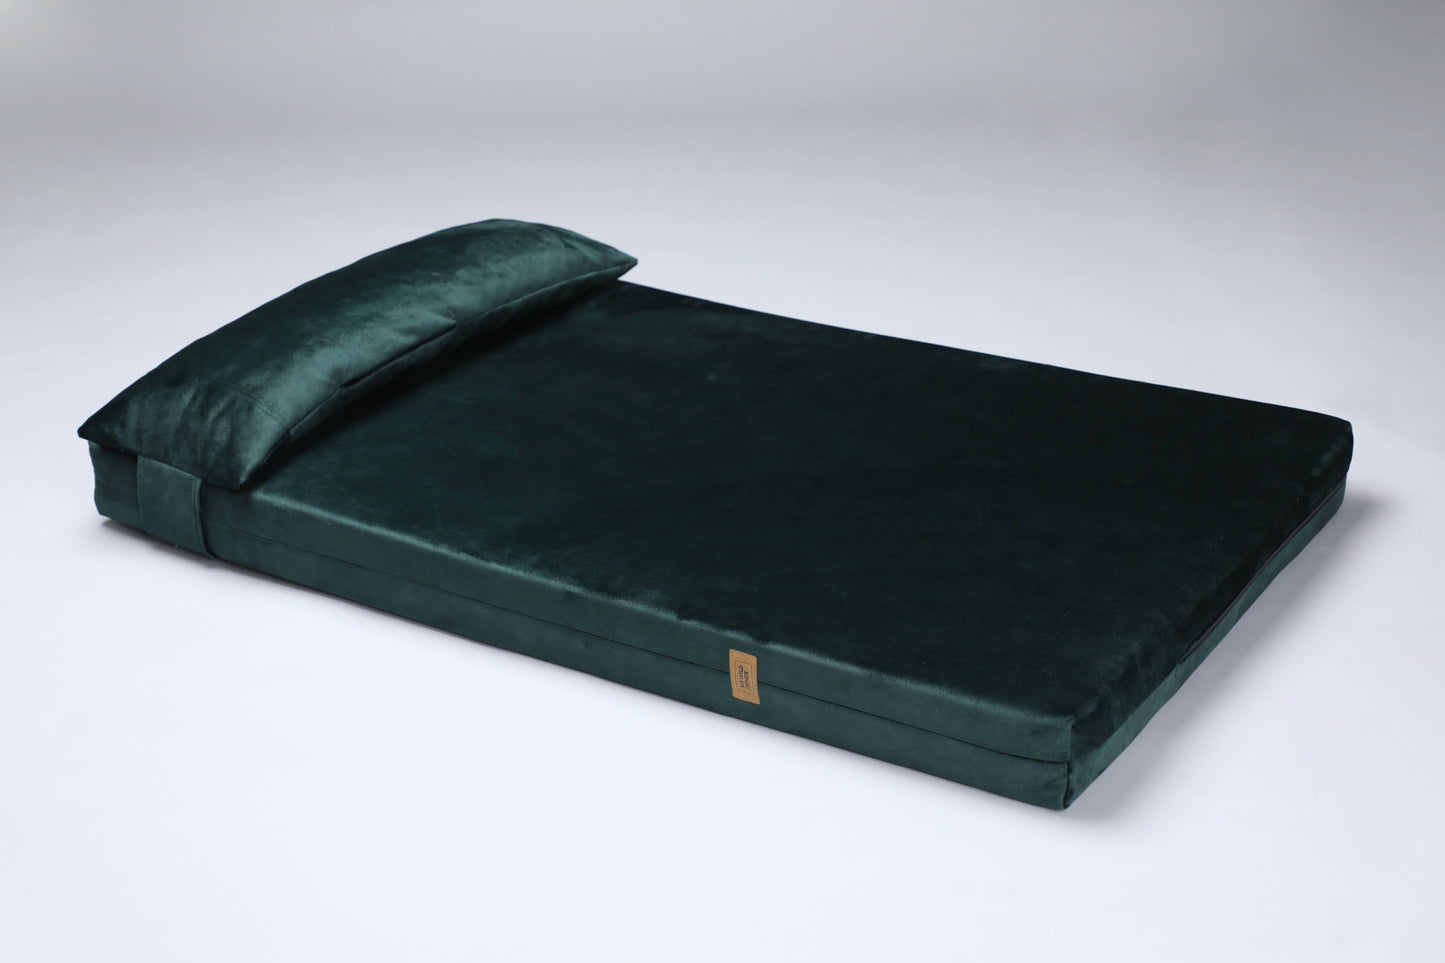 2-sided velvet dog bed. EMERALD GREEN - European handmade dog accessories by My Wild Other